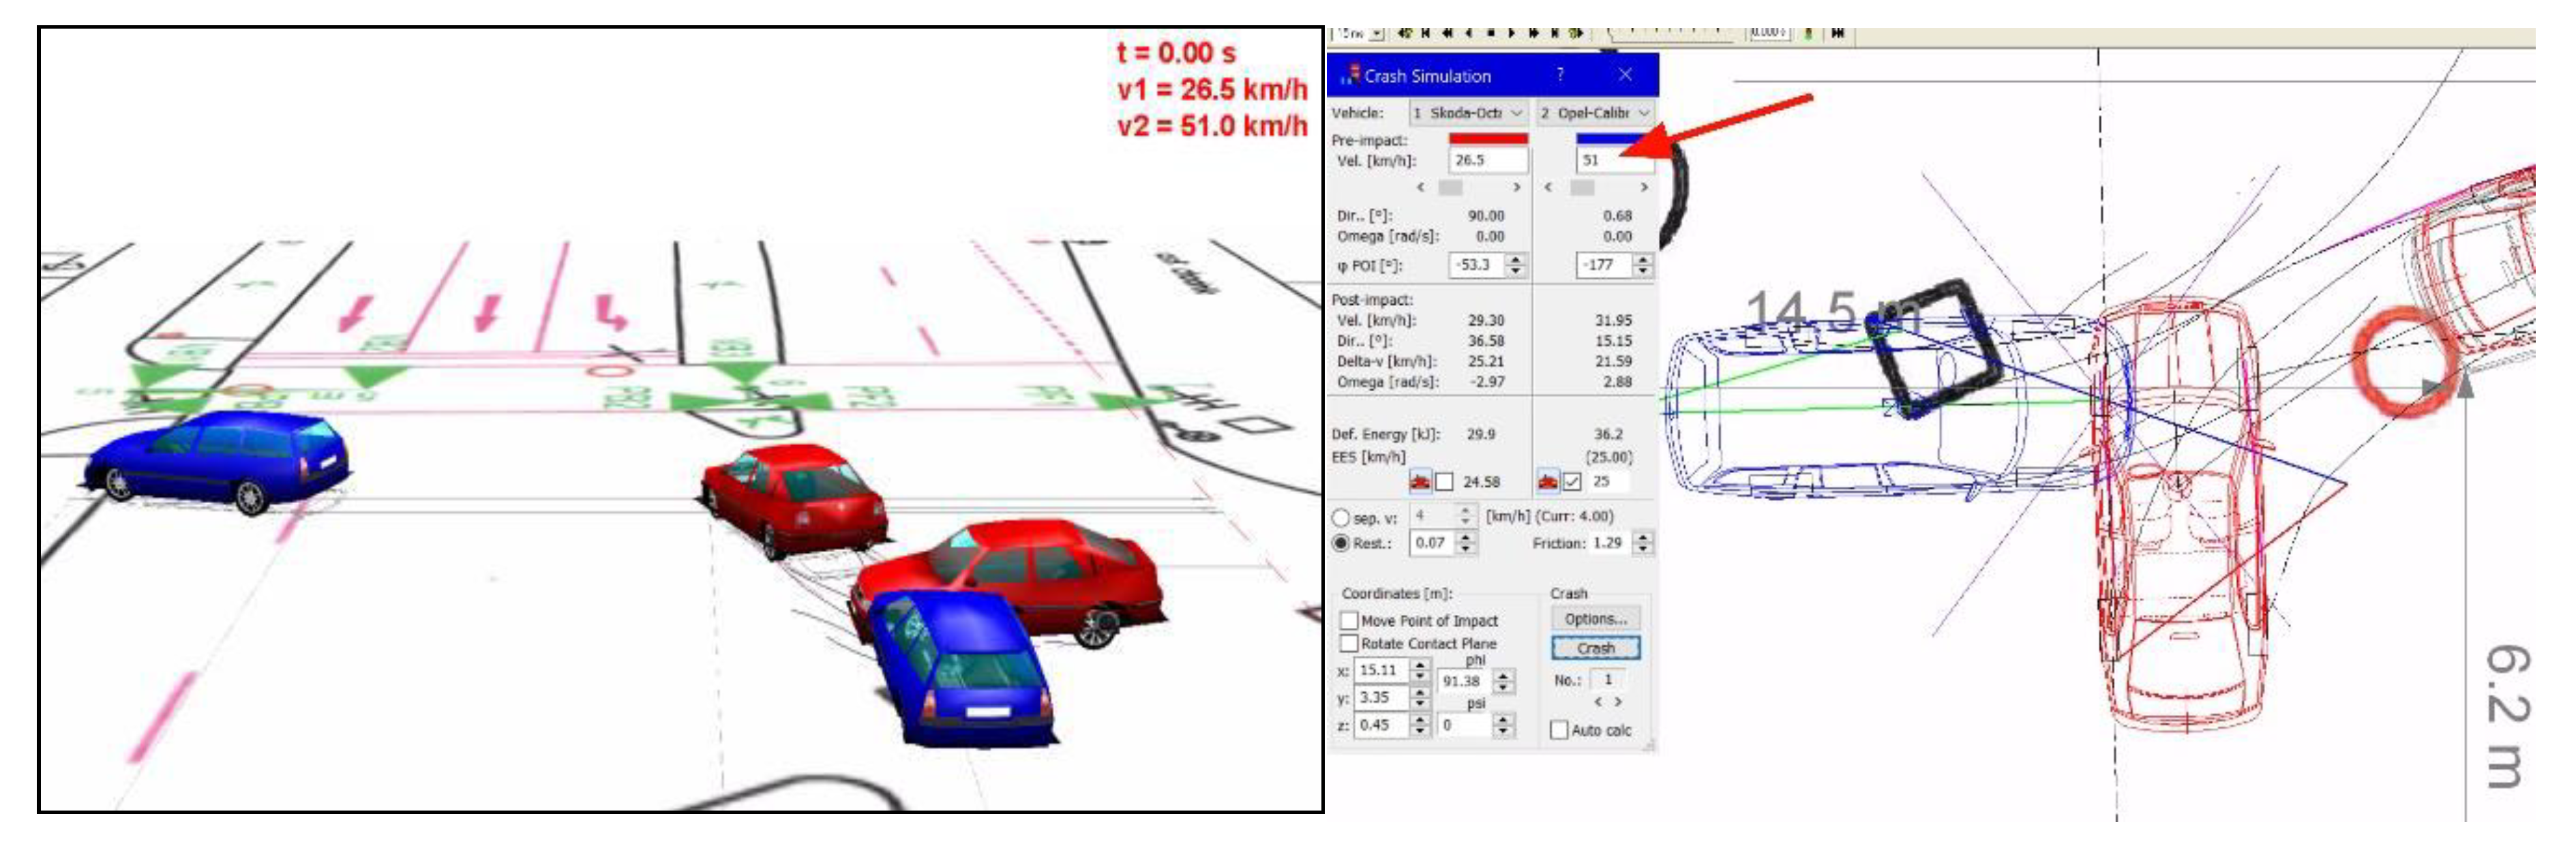 traffic accident simulation software